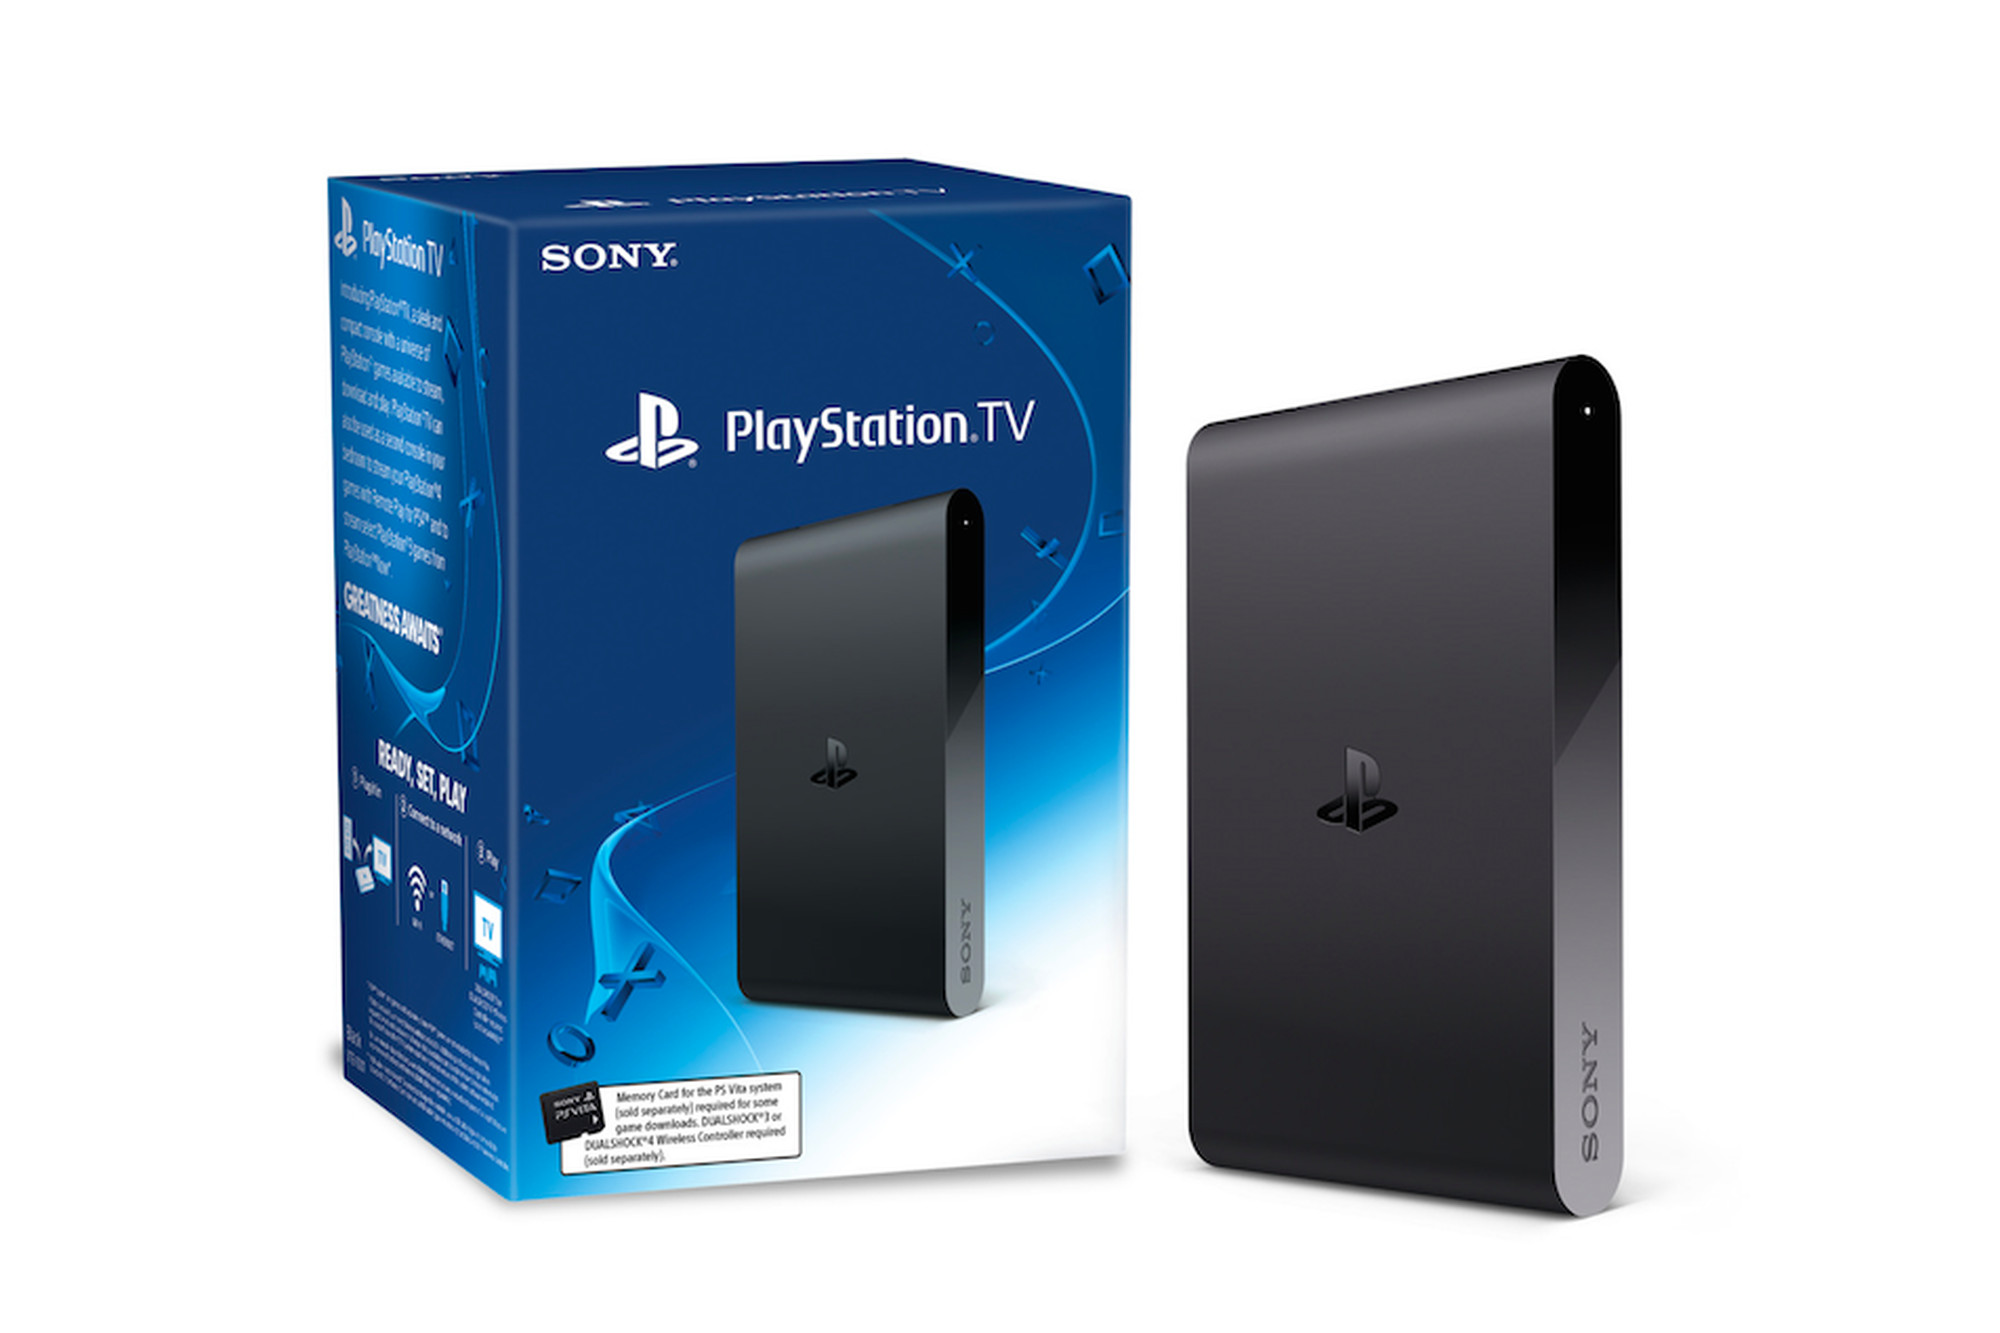 pint Sætte Pub Sony's PlayStation TV coming to US on October 14th - The Verge